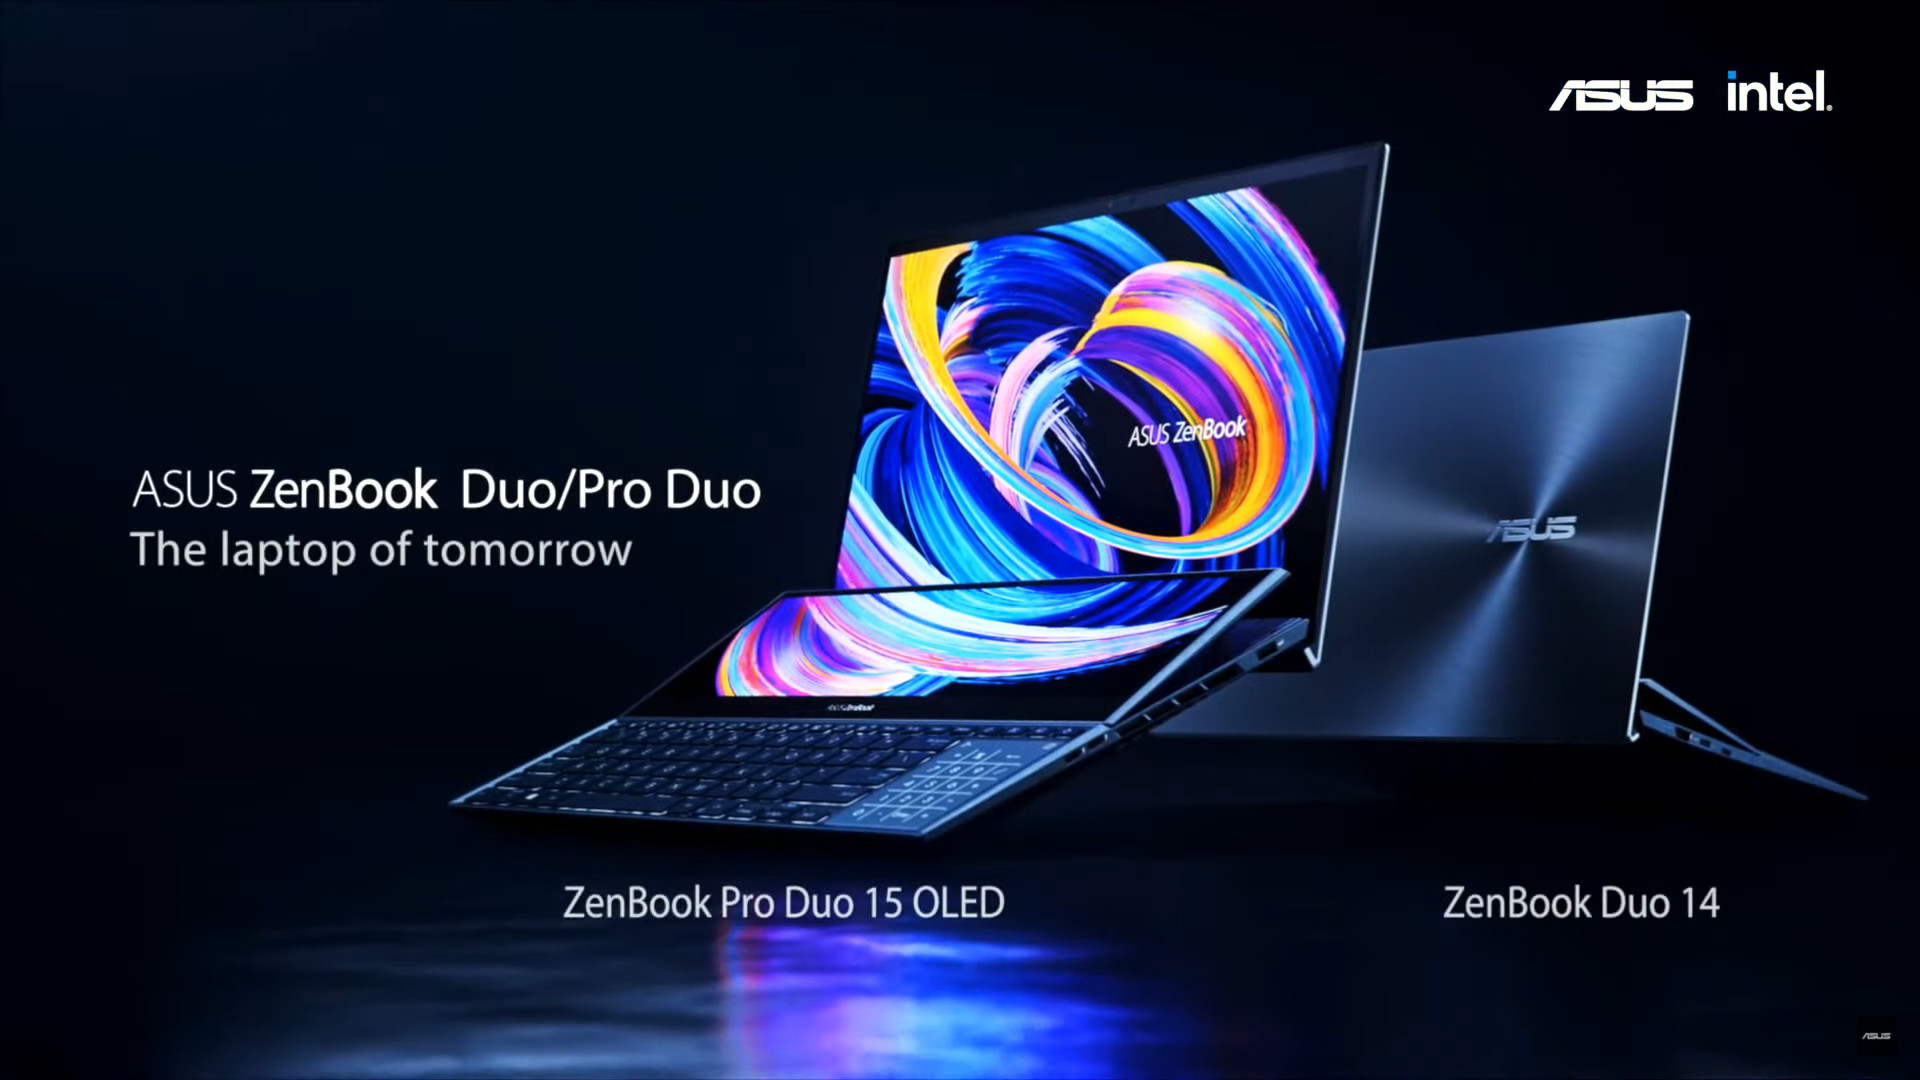 Asus Refreshes Its Zenbook Duo Family With Pen Support Tilting